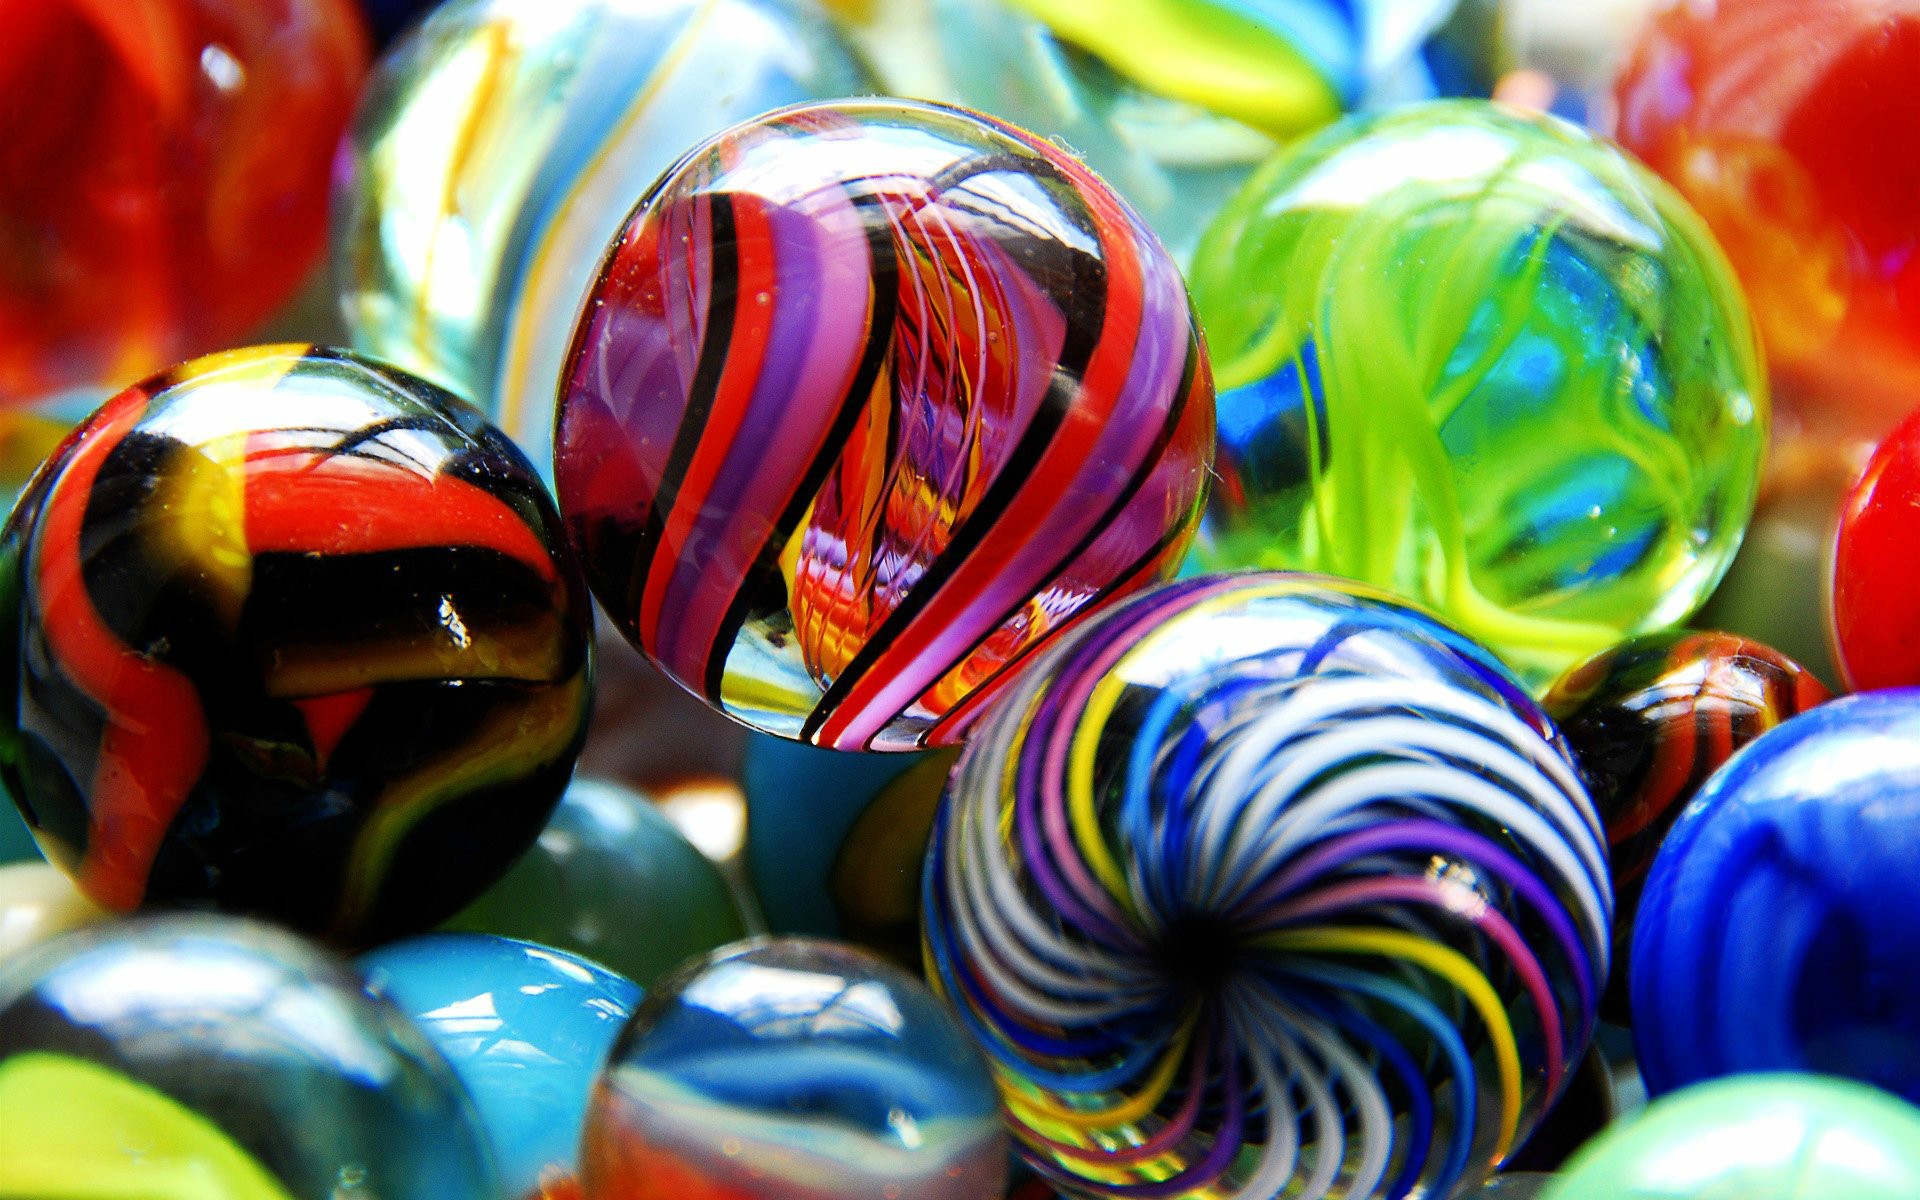 Colored Glass Marbles Balls Desktop Wallpaper Picture For